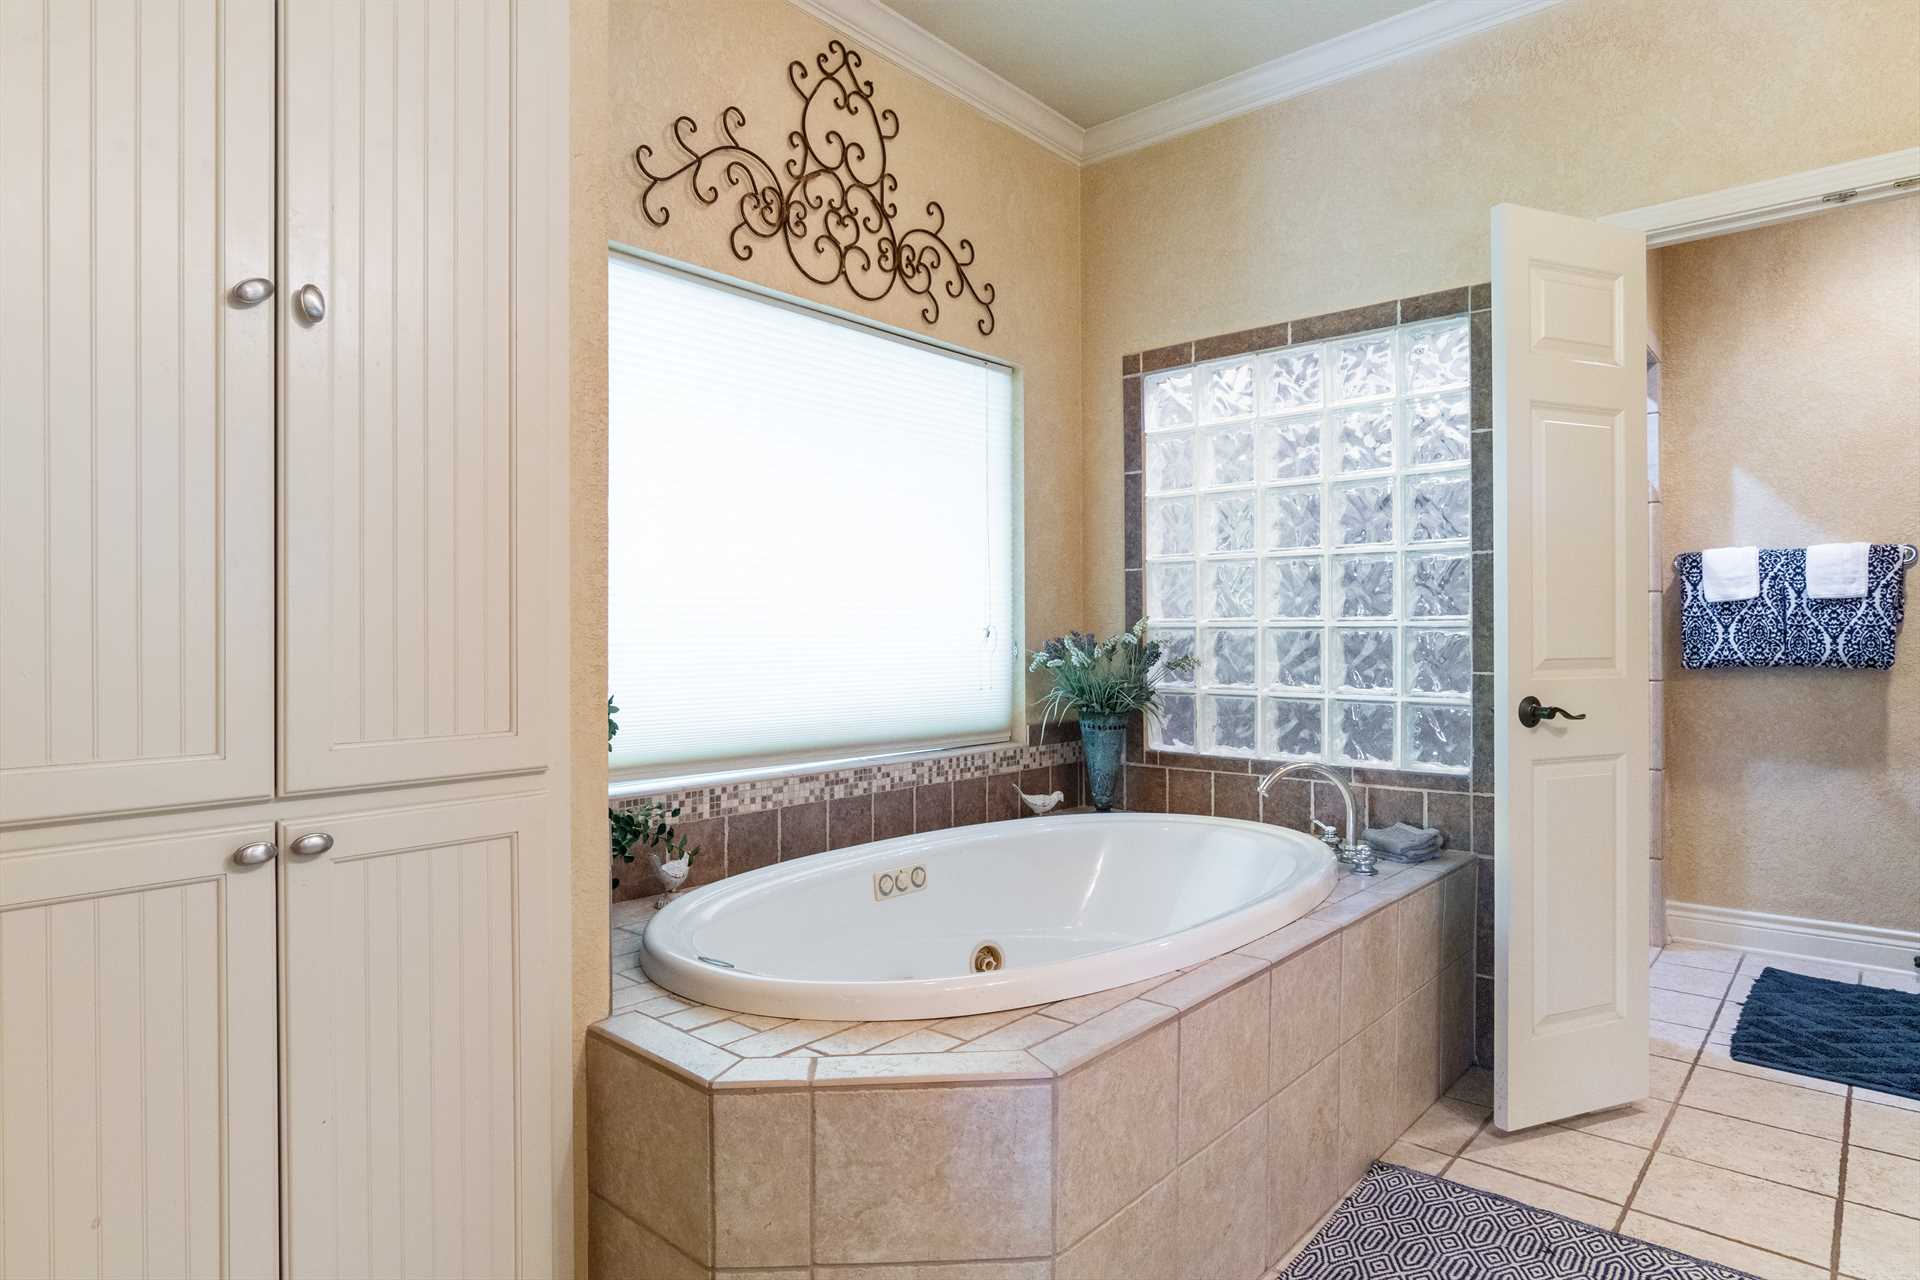                                                 The roomy and soothing Jacuzzi tub is the centerpiece of the master bath!